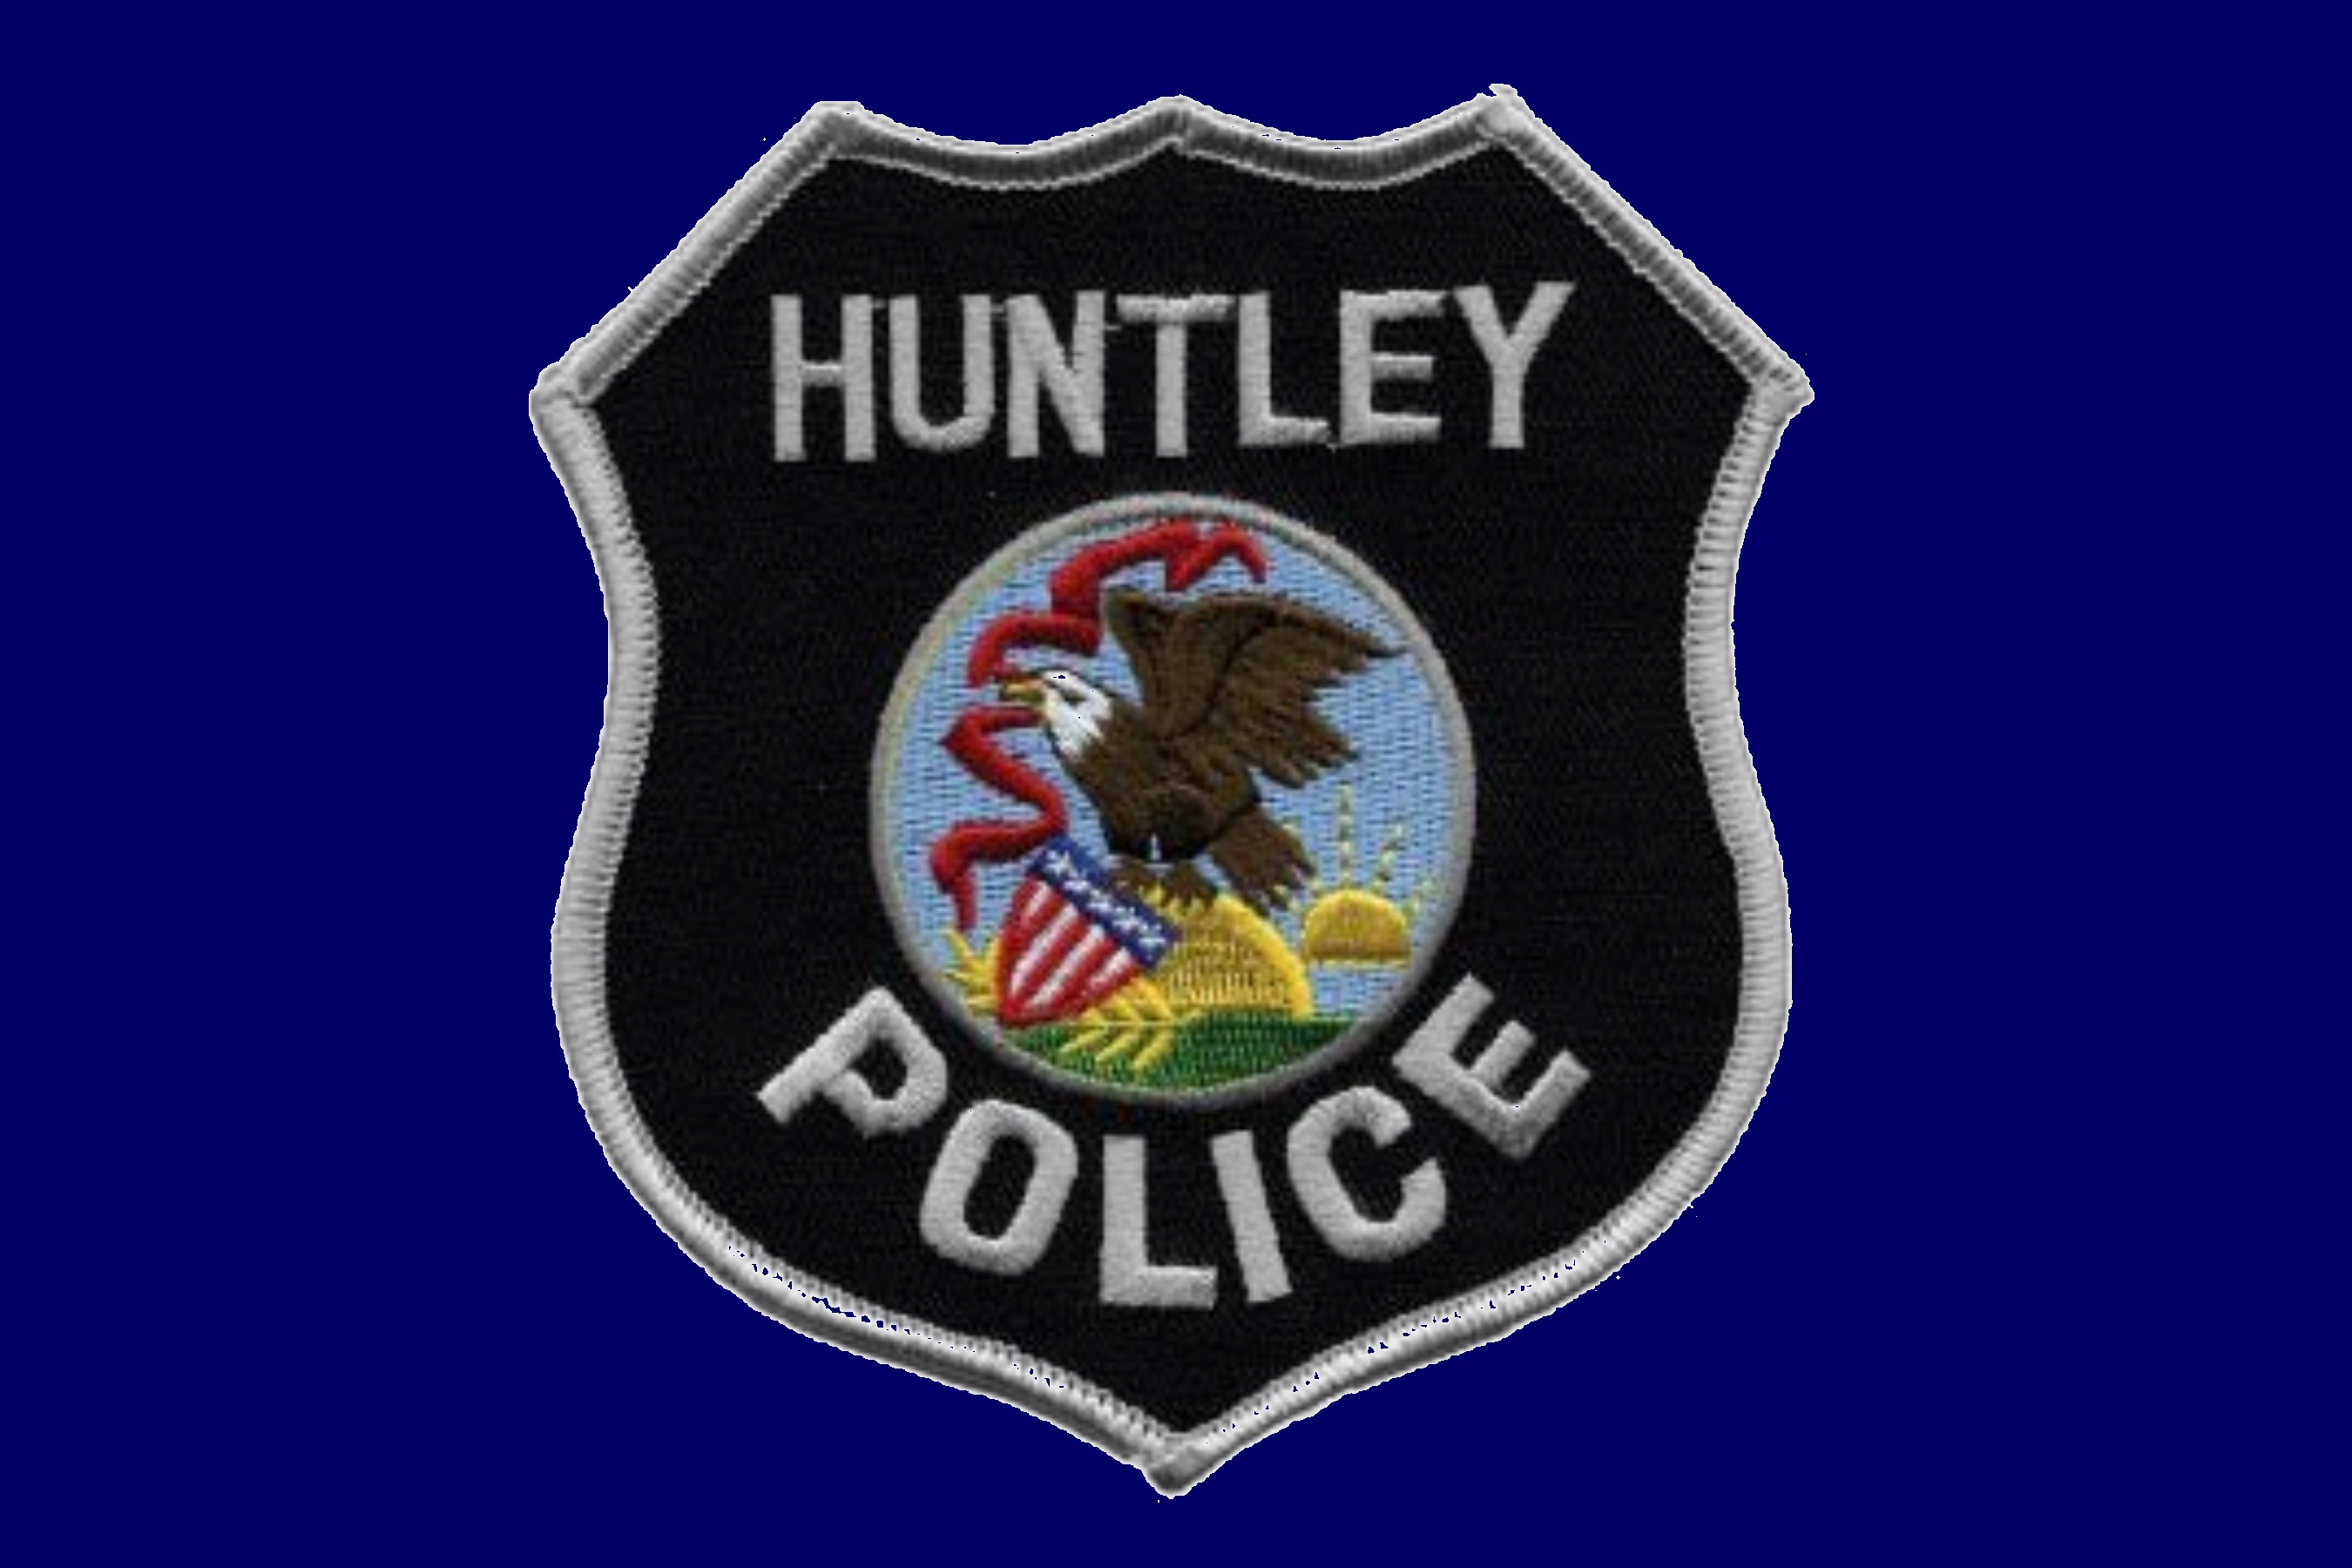 Police Patch News Image